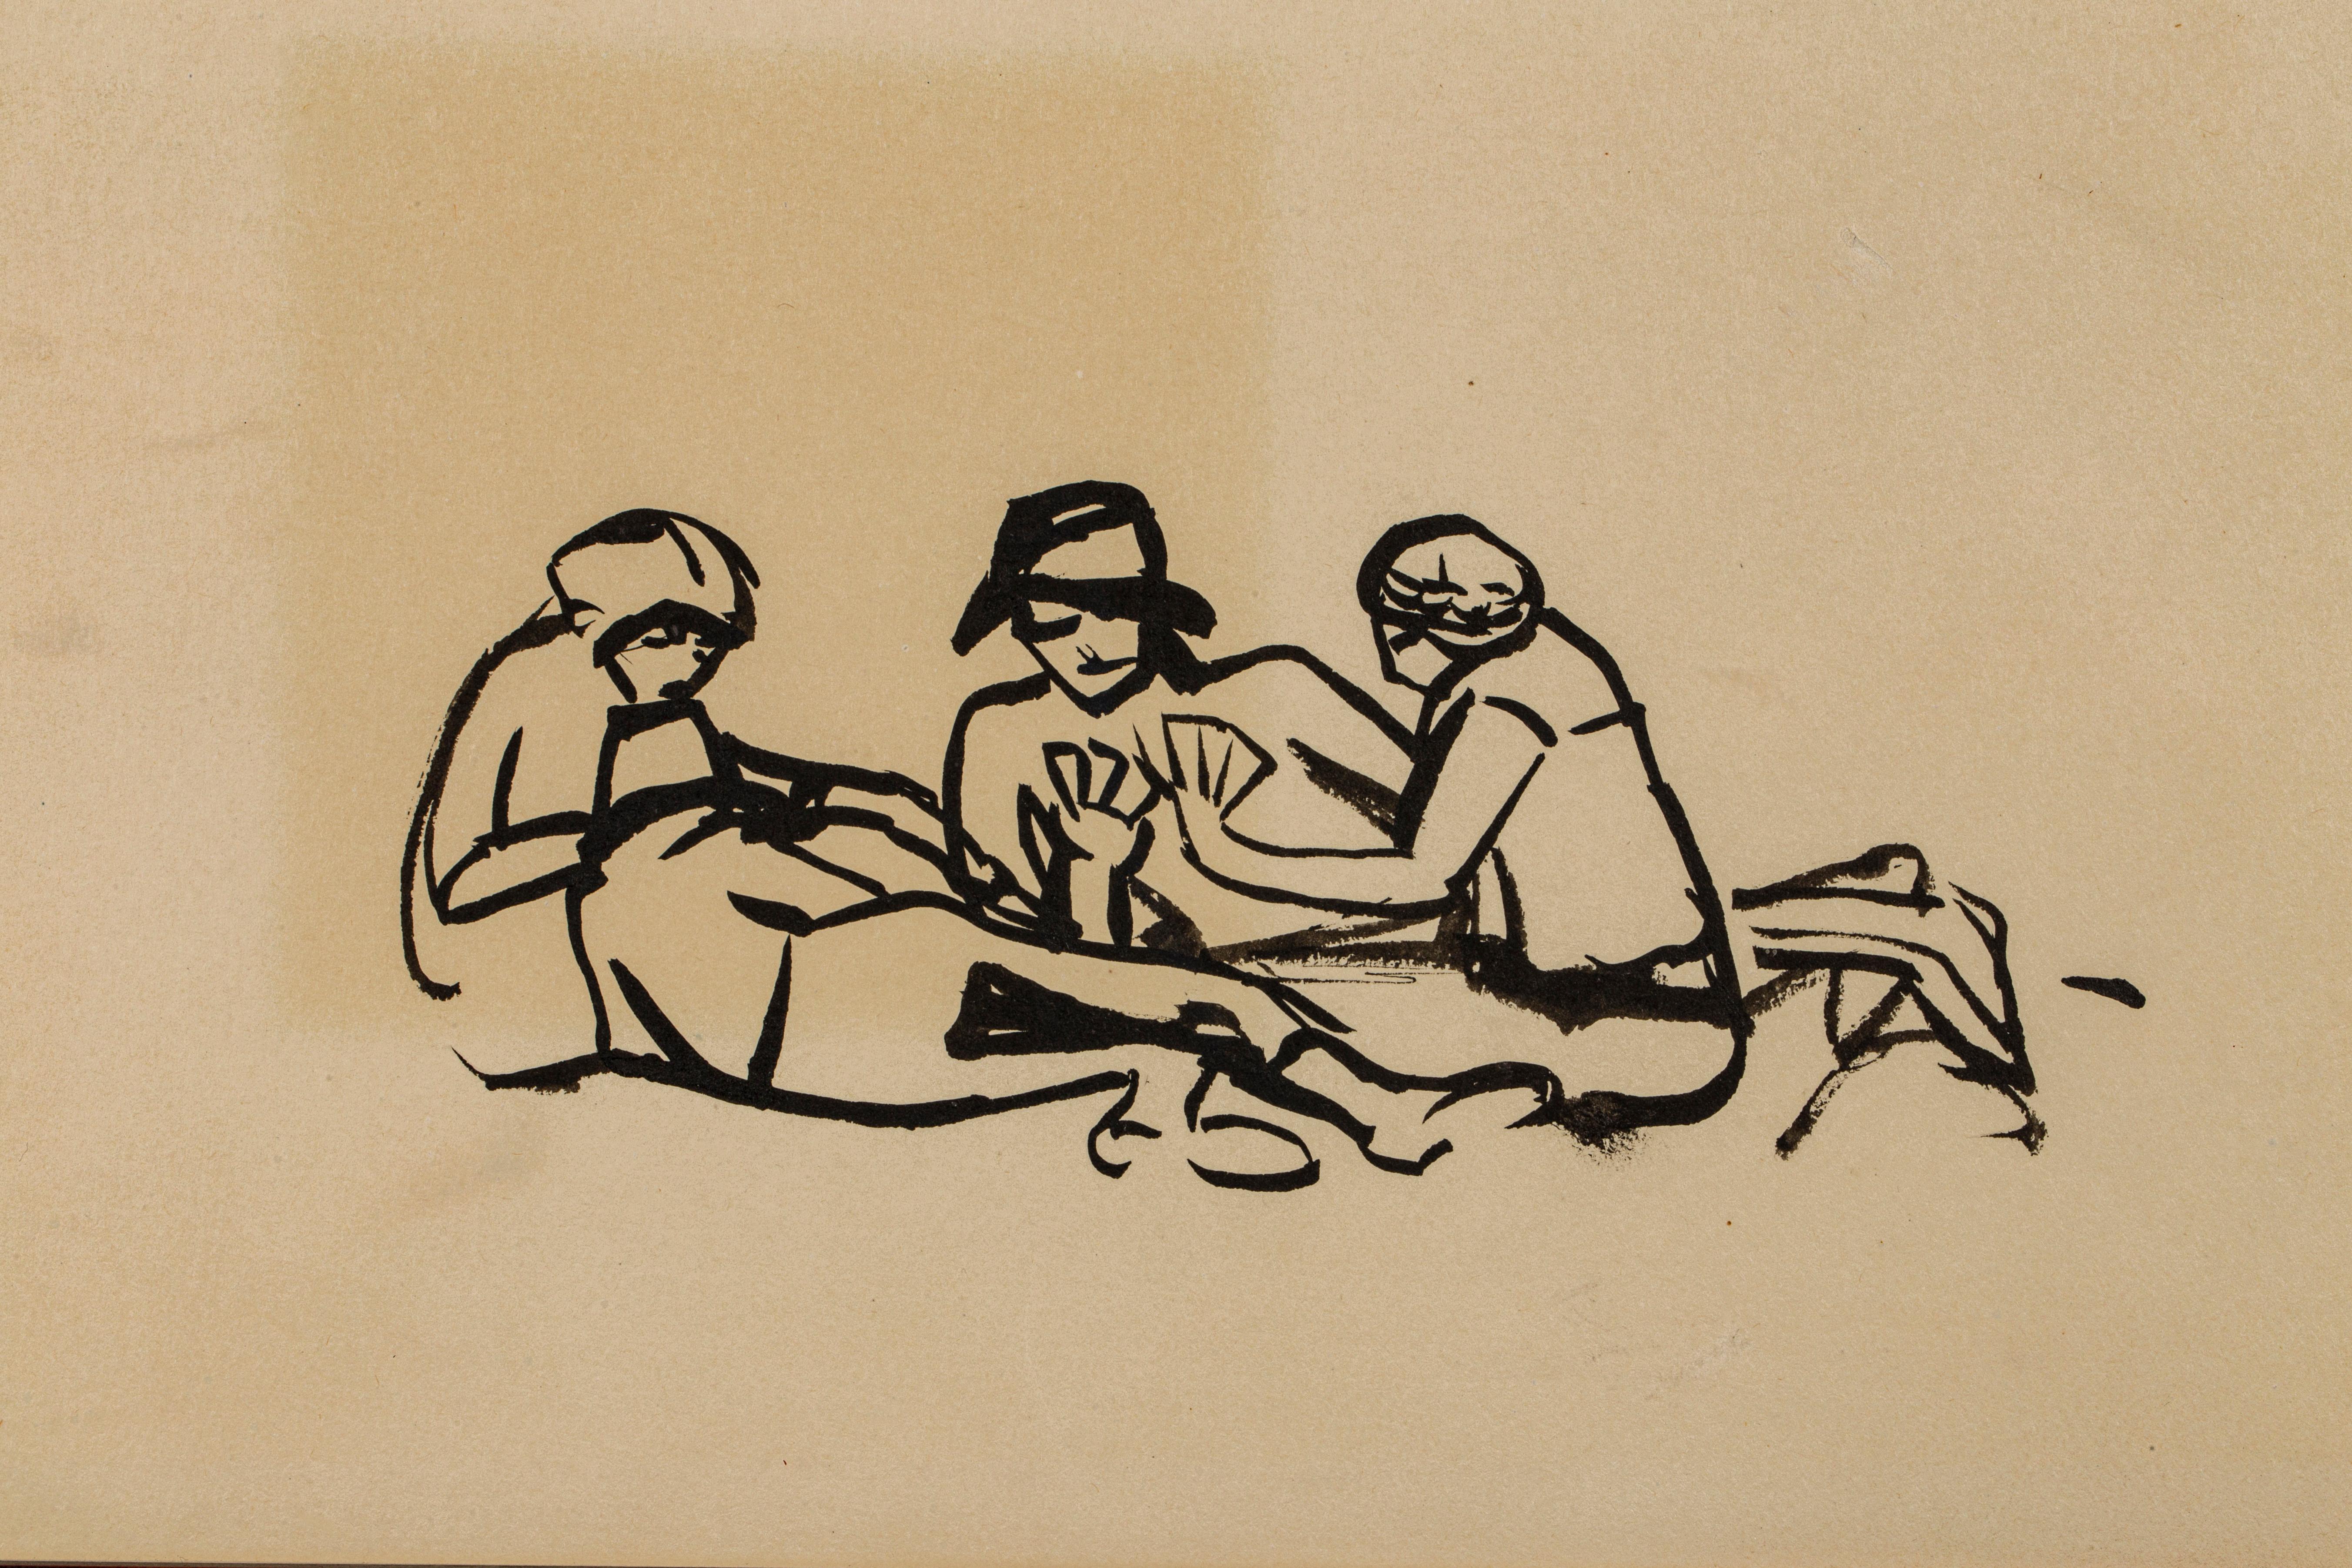 Marguerite Zorach, 1887-1968
The Card Game, 1912
Ink on paper
9 ¼ x 12 inches
Signed and inscribed (on verso): Marguerite Zorach Playing Cards/Calif./1912.”
ZoraM-02